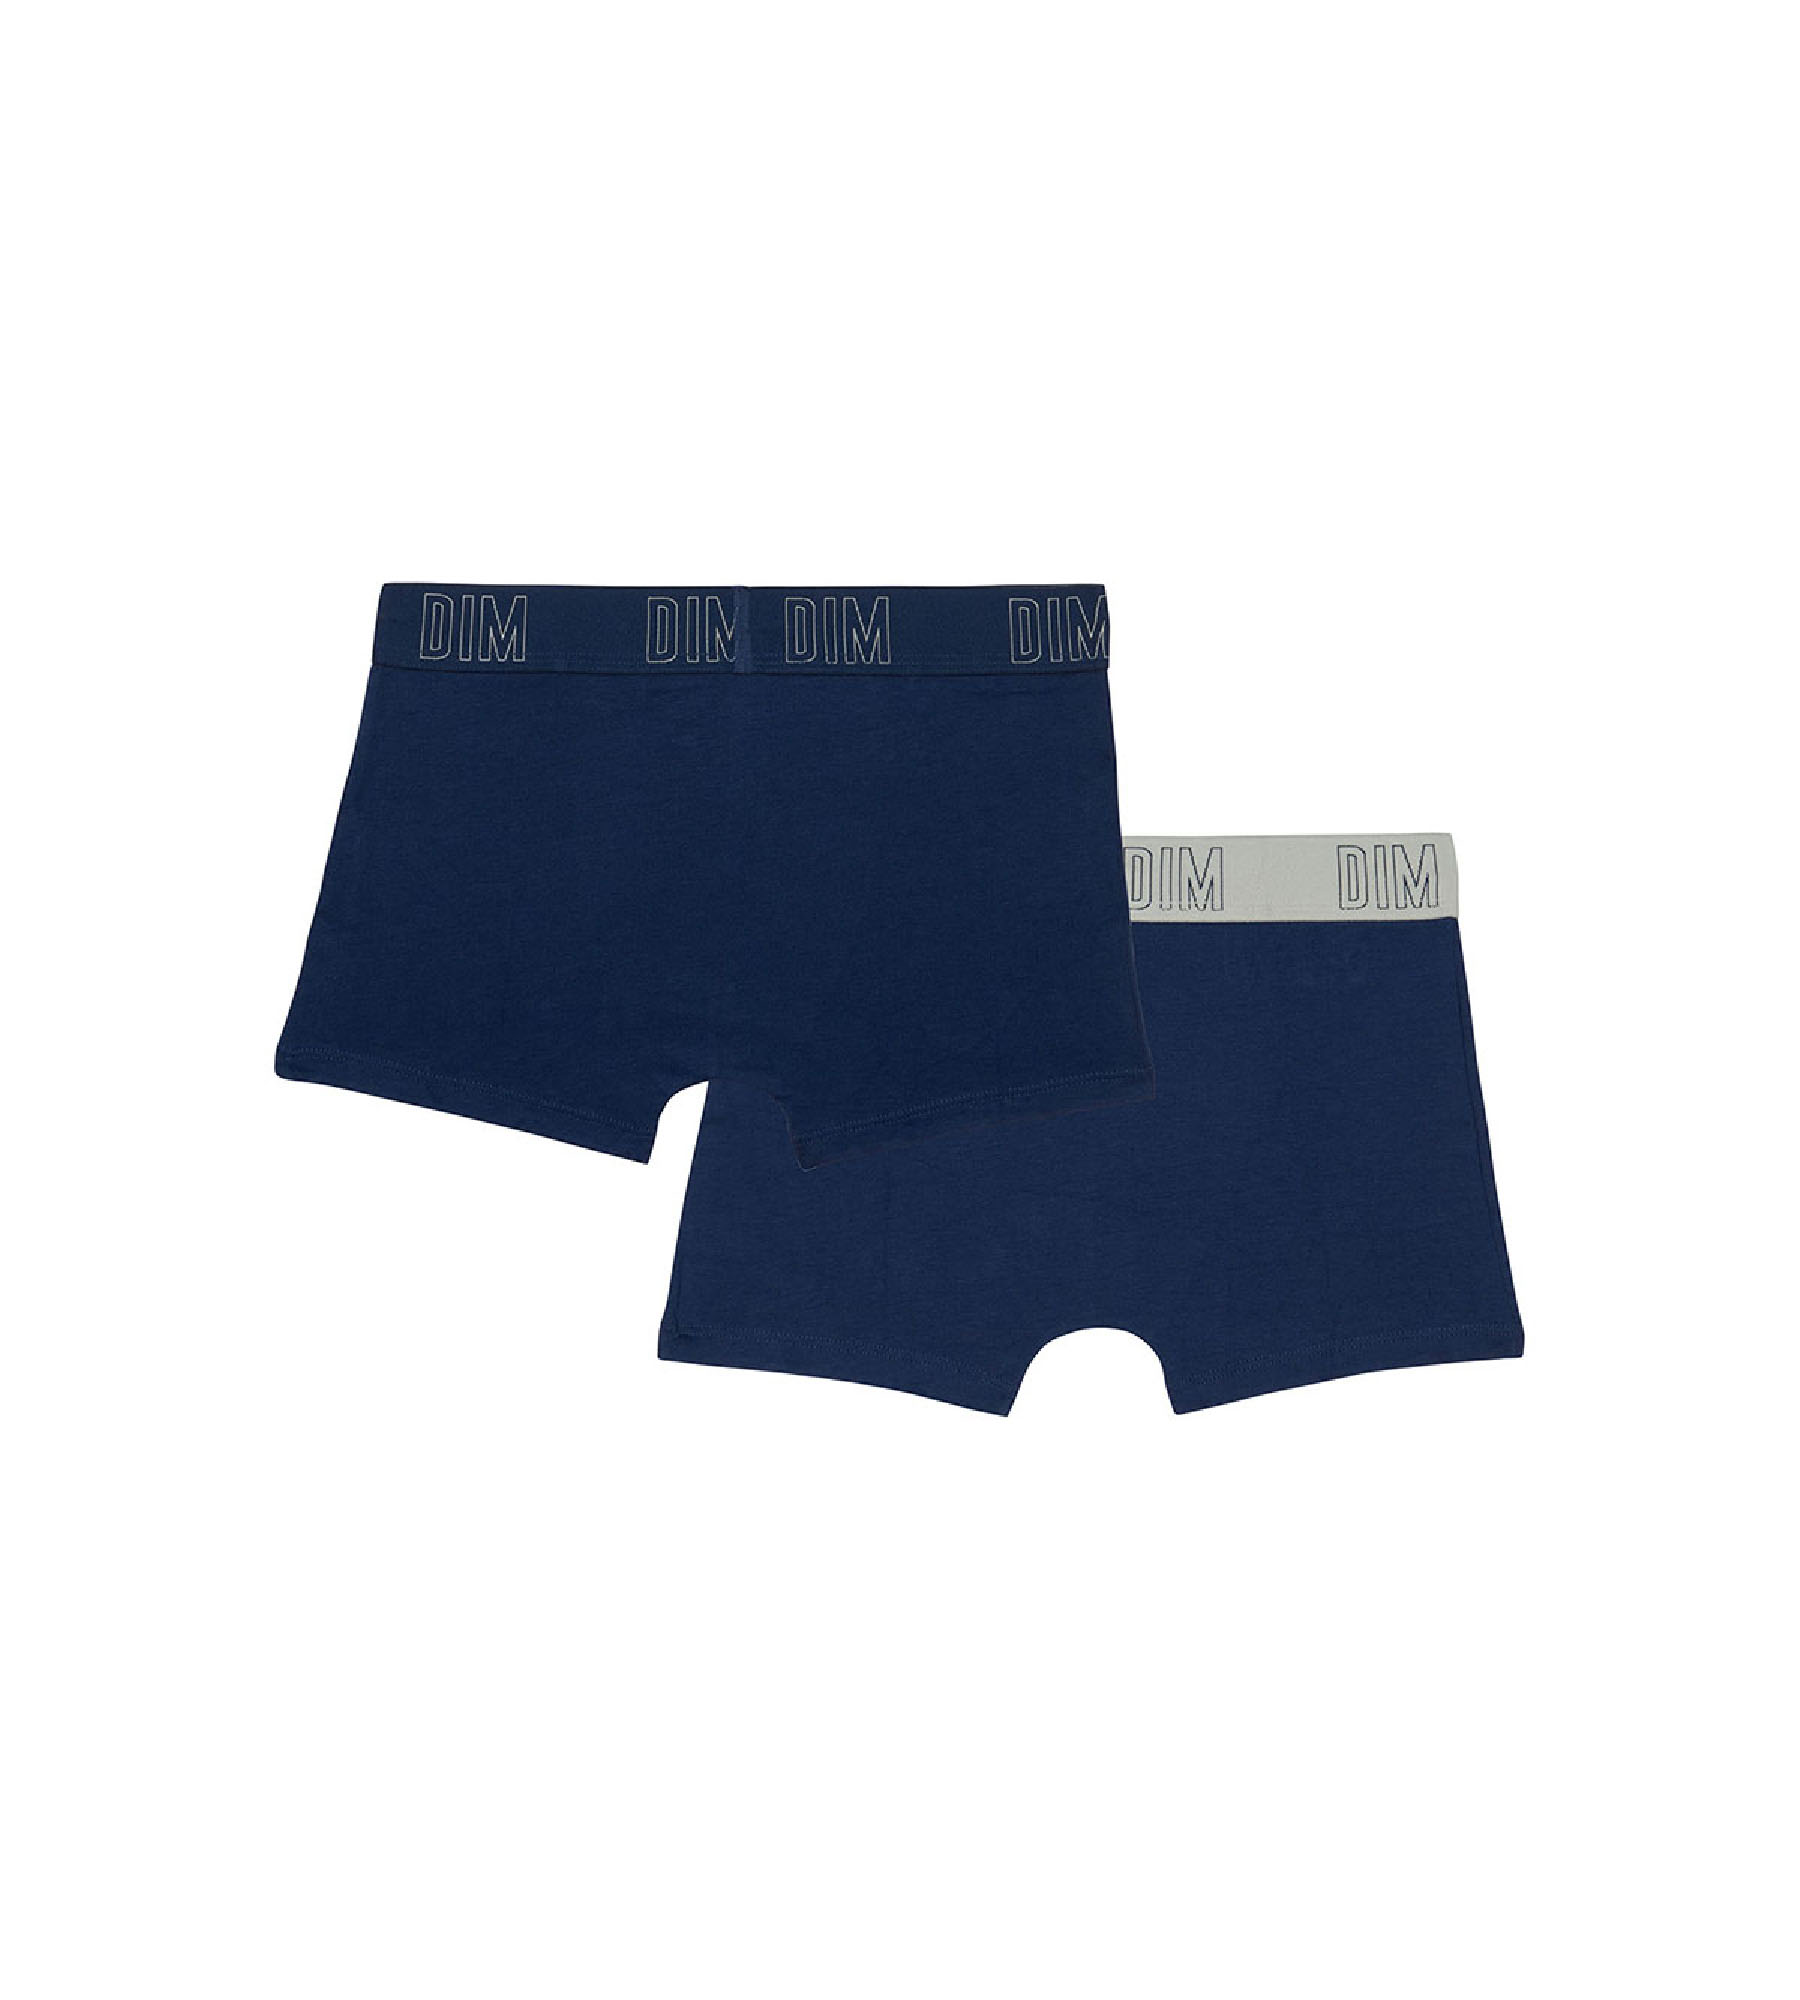 Dim Skin Care Pack of 2 boys' boxers in Navy Blue organic cotton